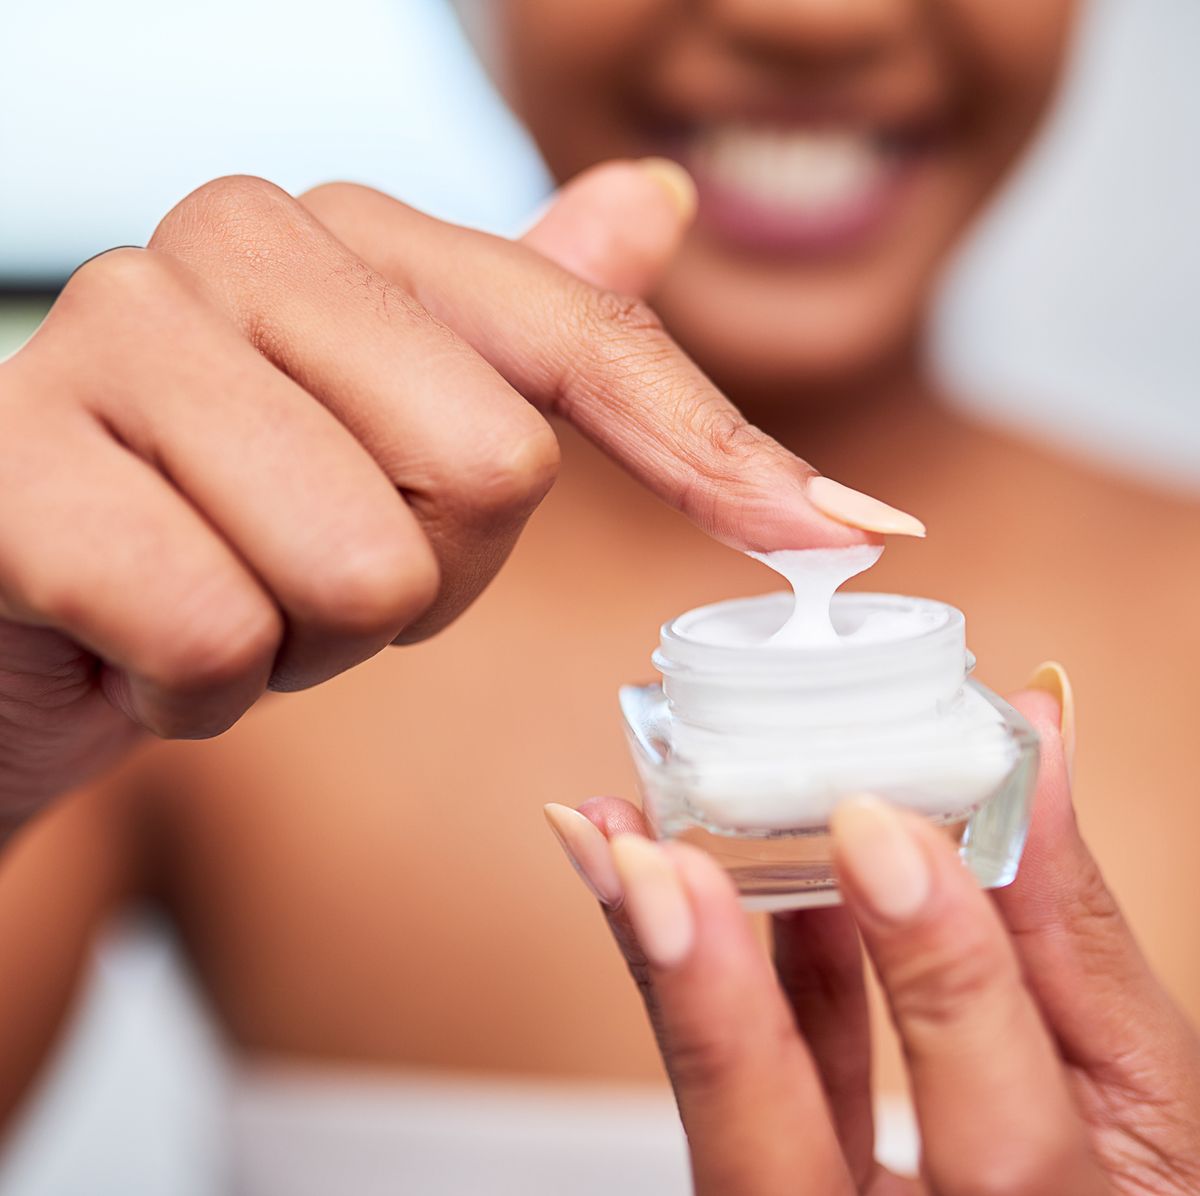 11 Best Hand Creams for Dry Skin, According to Dermatologists 2023